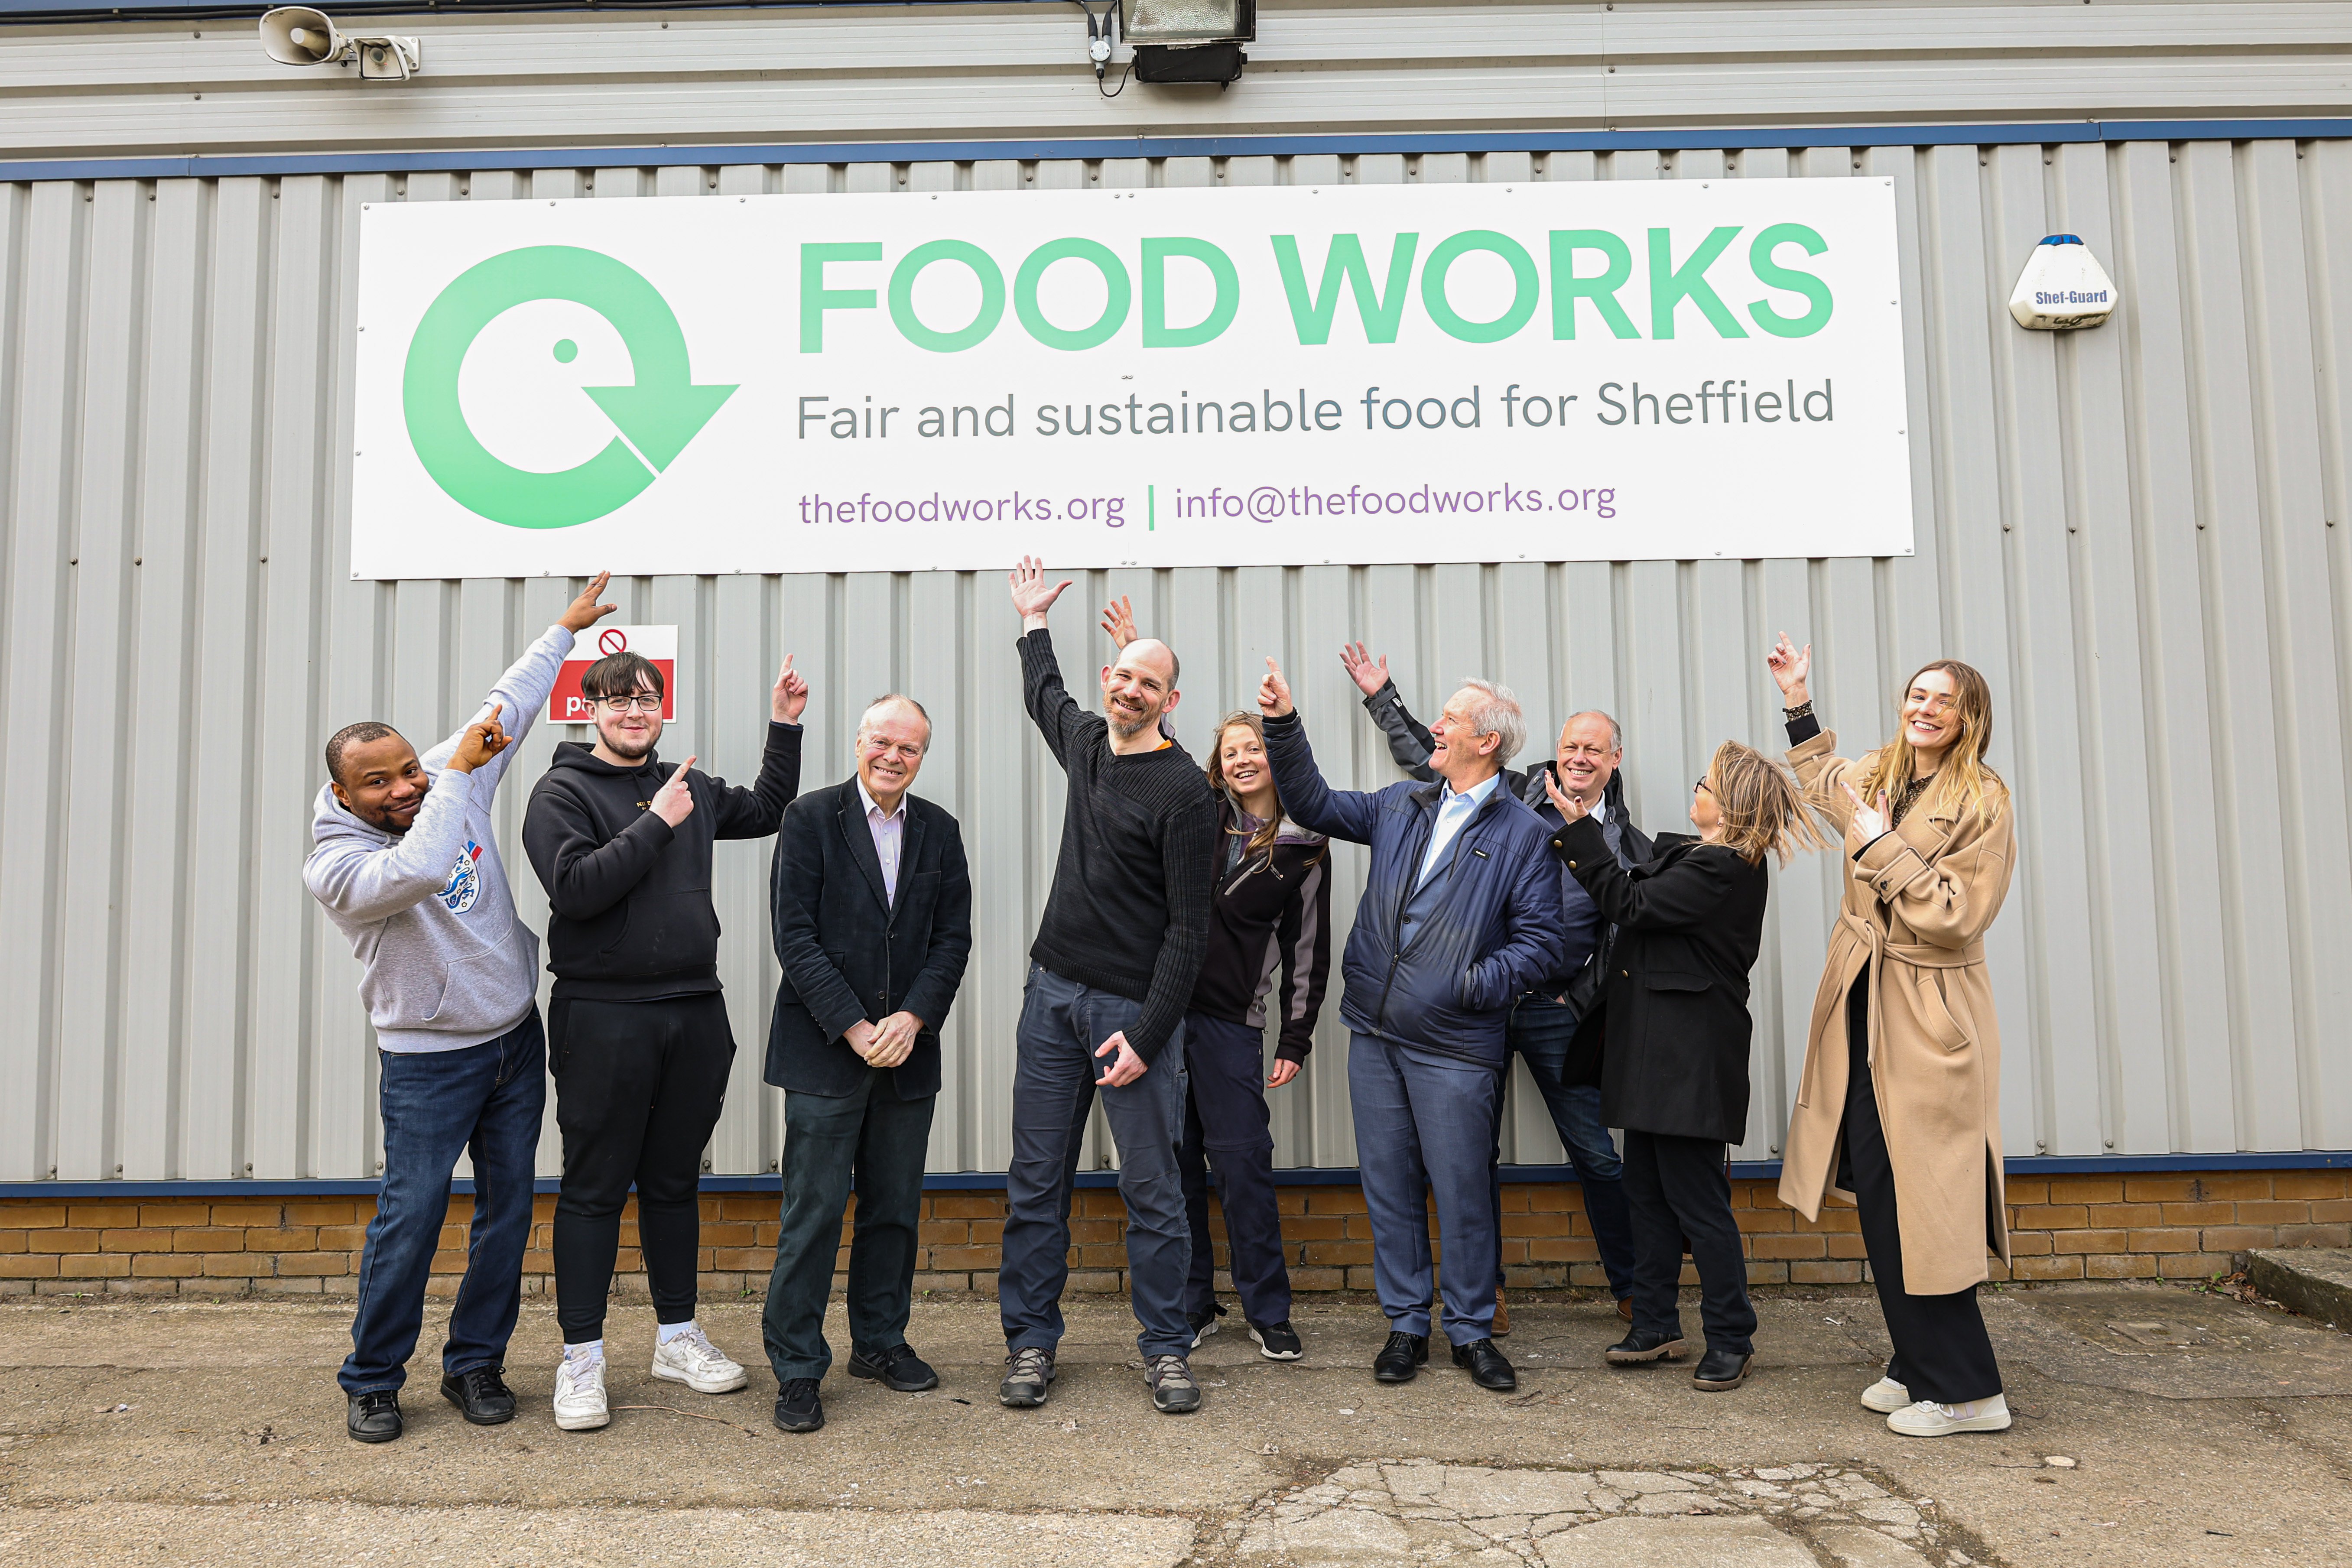 Clive Betts MP (second from left) and Food Works CEO Rene Meijer (third from left) join staff from Food Works, Big Society Capital and Key Fund outside Food Works’ Handsworth ‘market’ – where food is delivered and stored